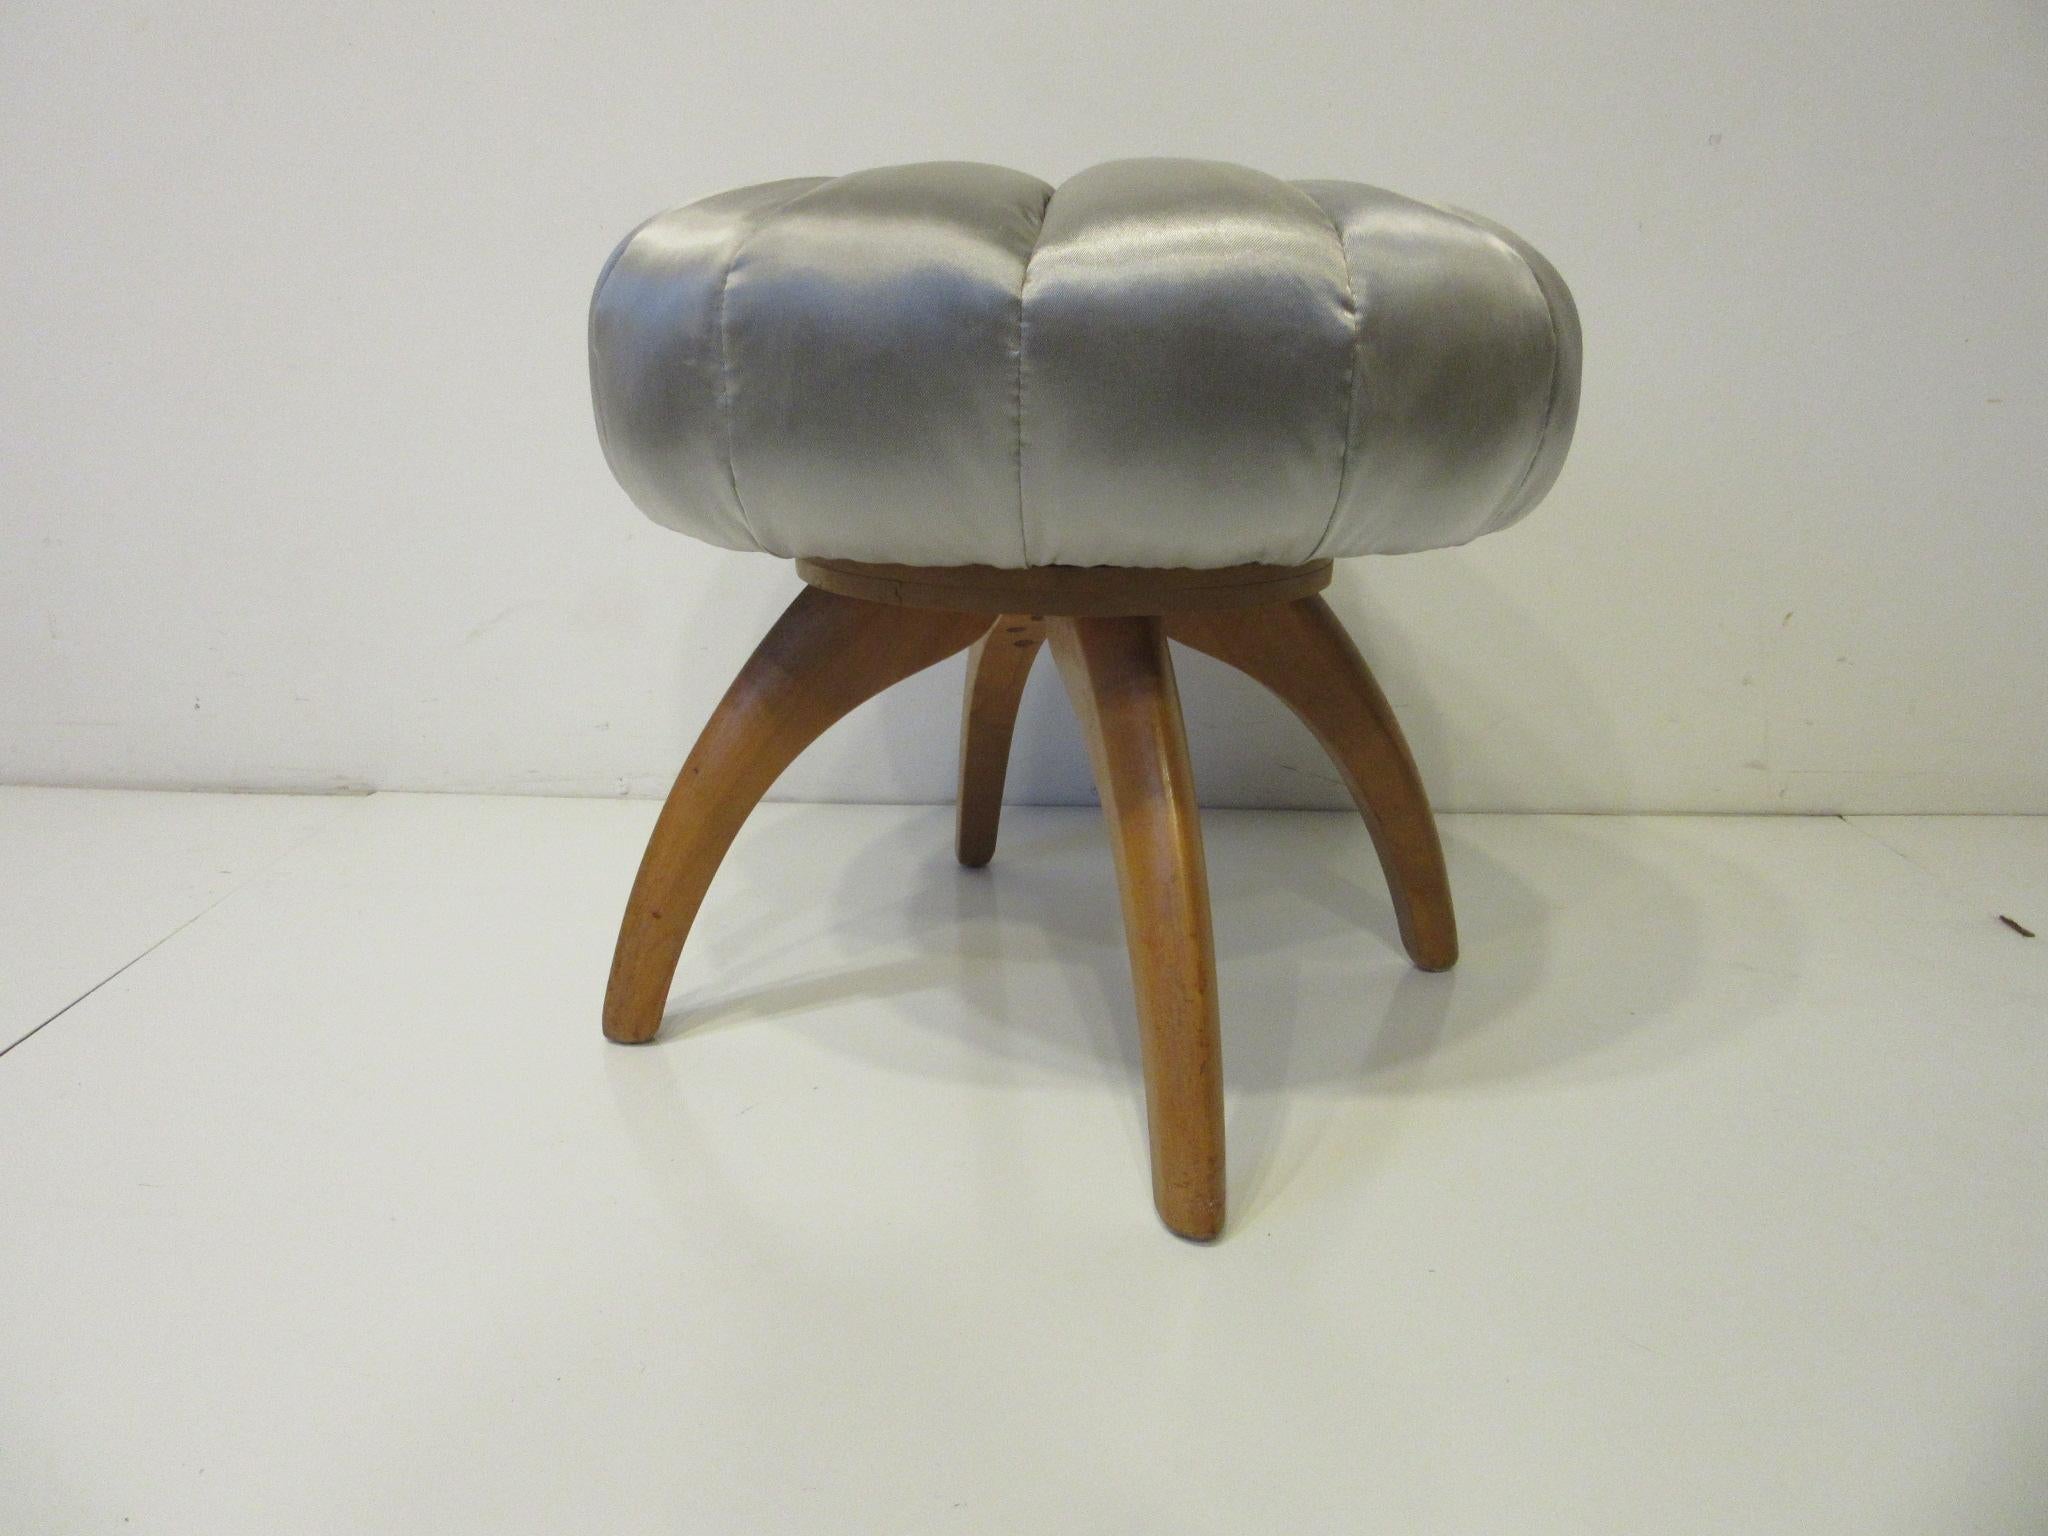 Vanity Pouffe / Stool by Heywood Wakefield for the Kohinoor Collection 1